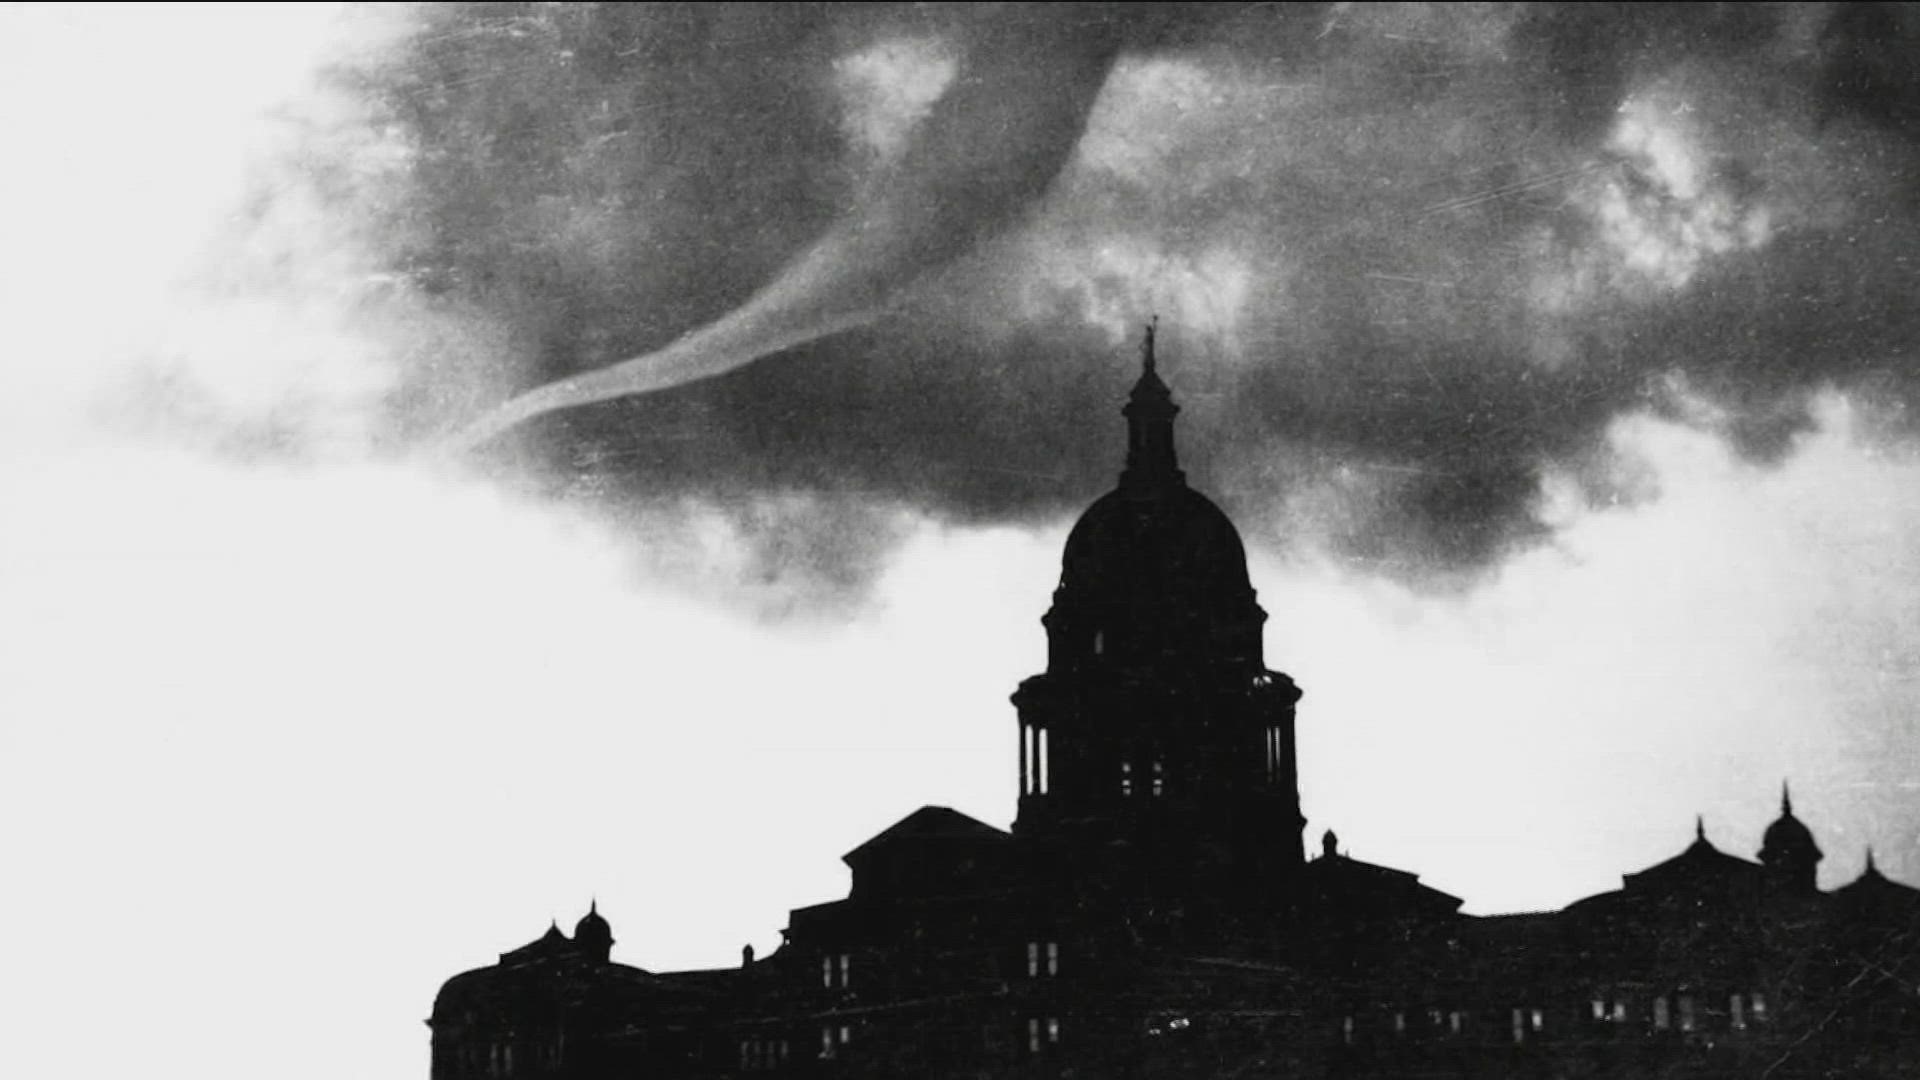 In late spring 1922, a tornado touched down in West Austin, followed by a second tornado east of downtown.